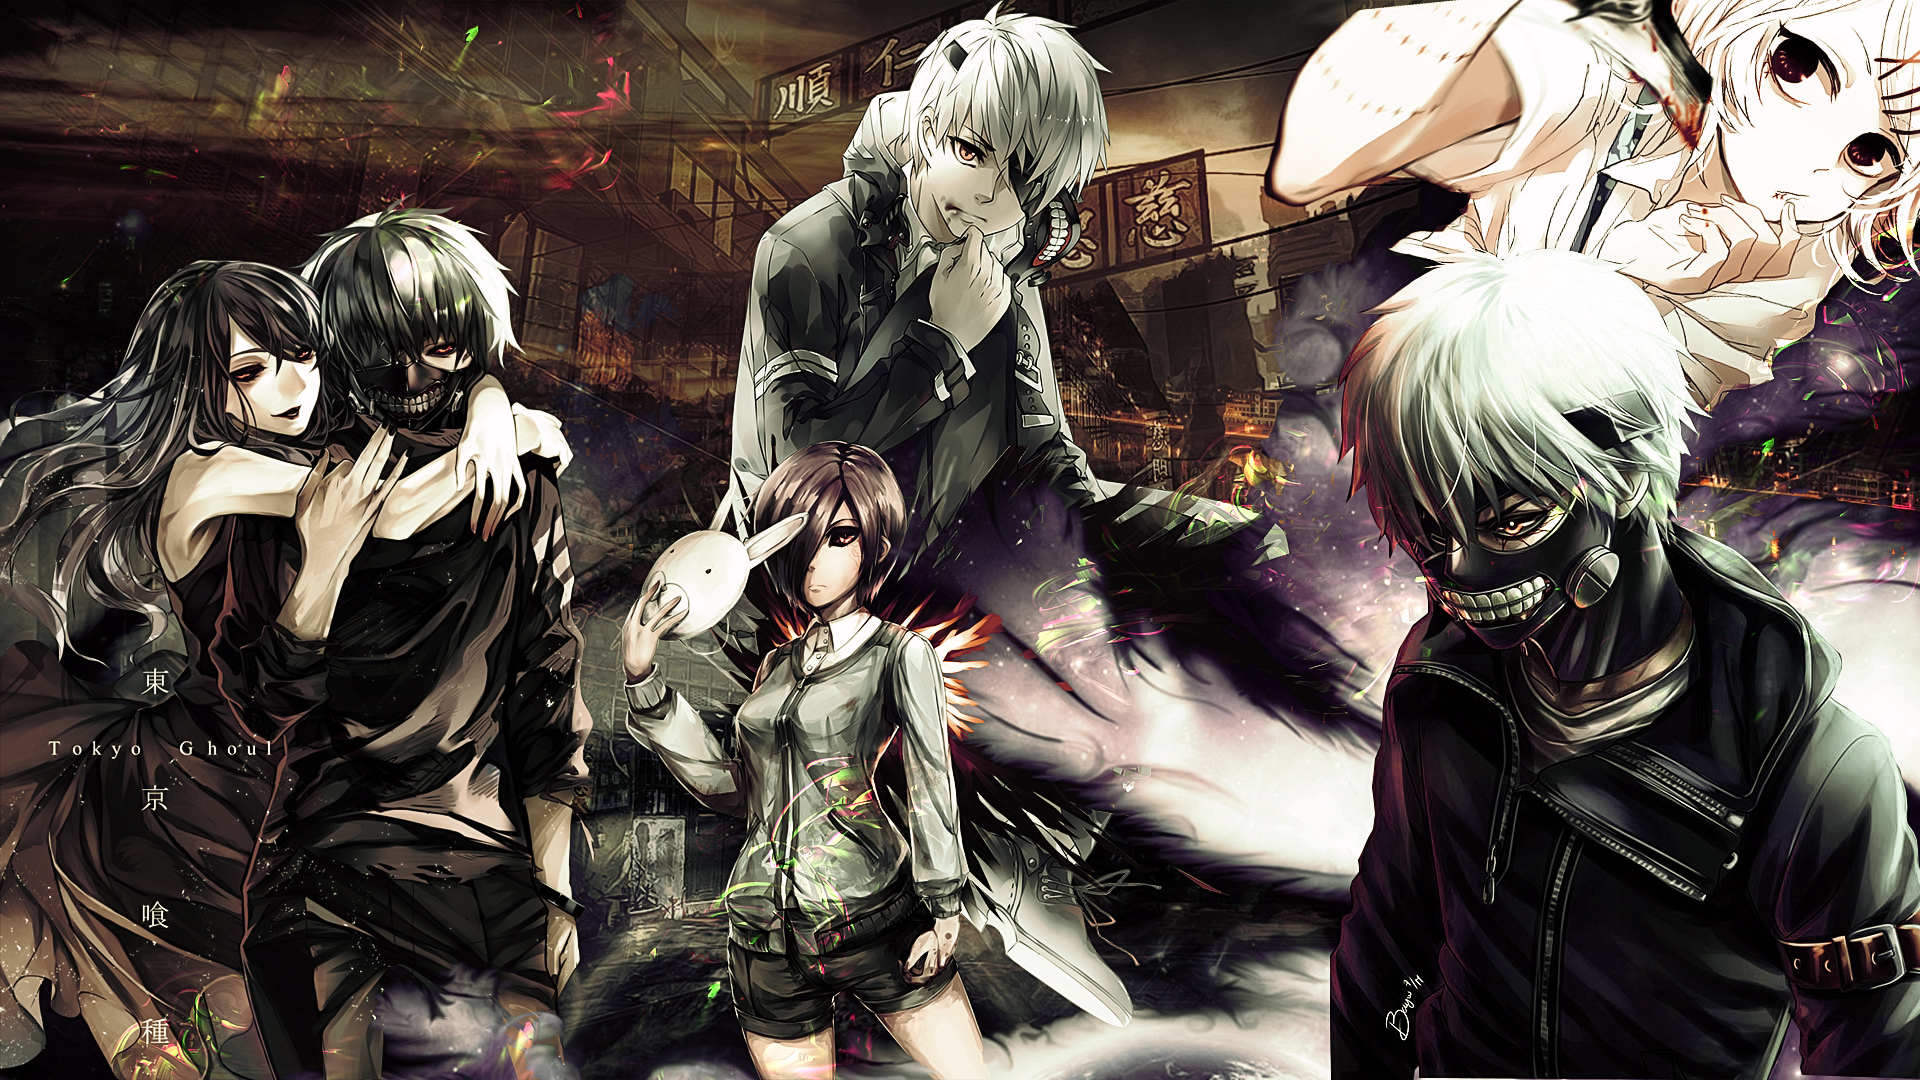 Tokyo Ghoul | Wallpaper | Photoshop by CagBcn on DeviantArt